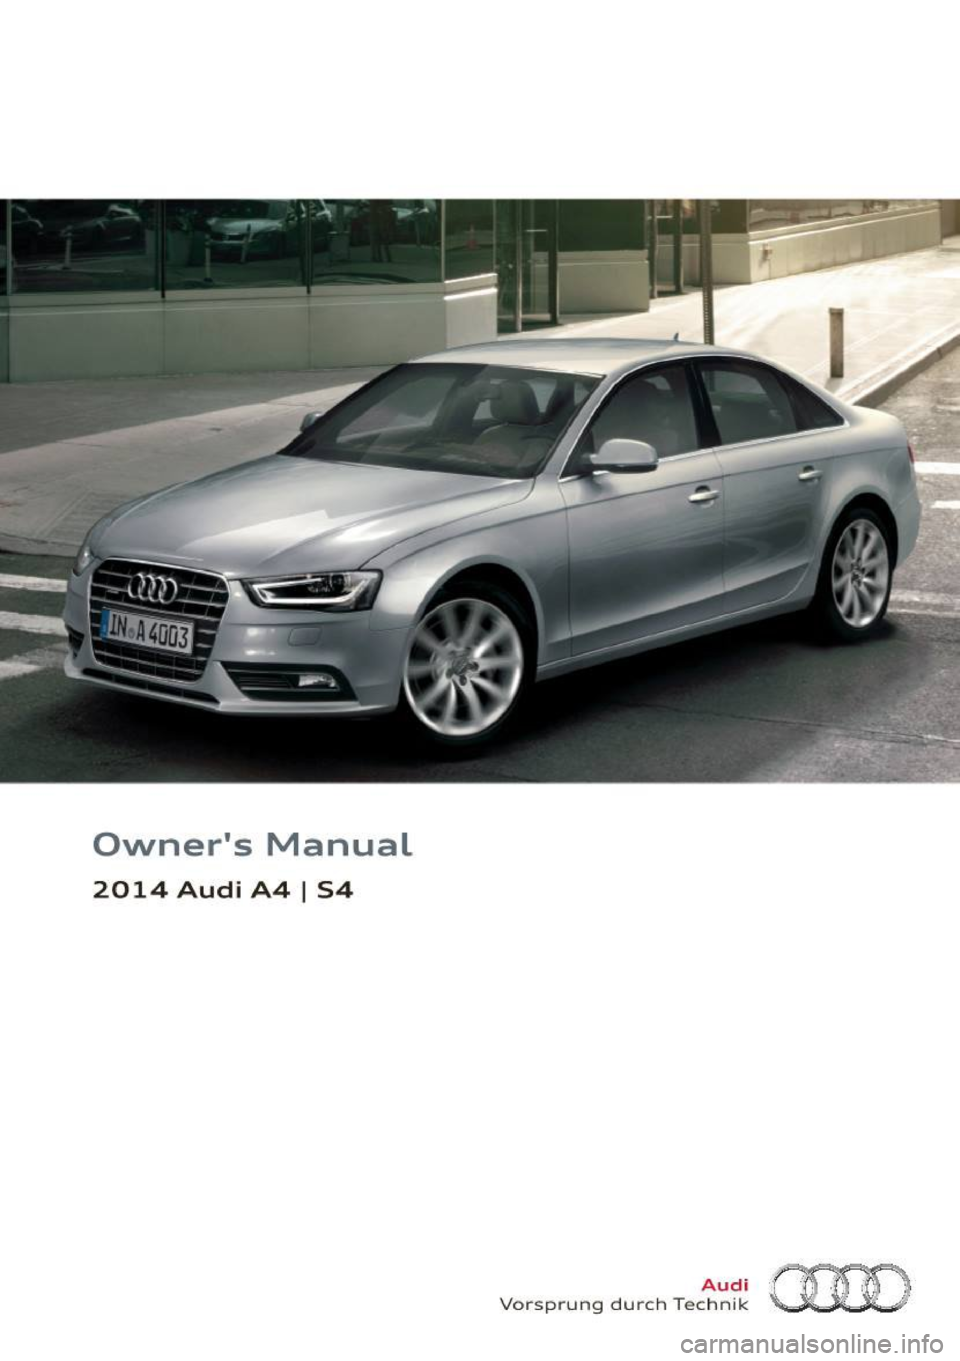 AUDI S4 2014  Owners Manual Owners  Manual 
2014 Audi  A4 I S4 
Vorsprung  durch Tec~~1~ :mD  